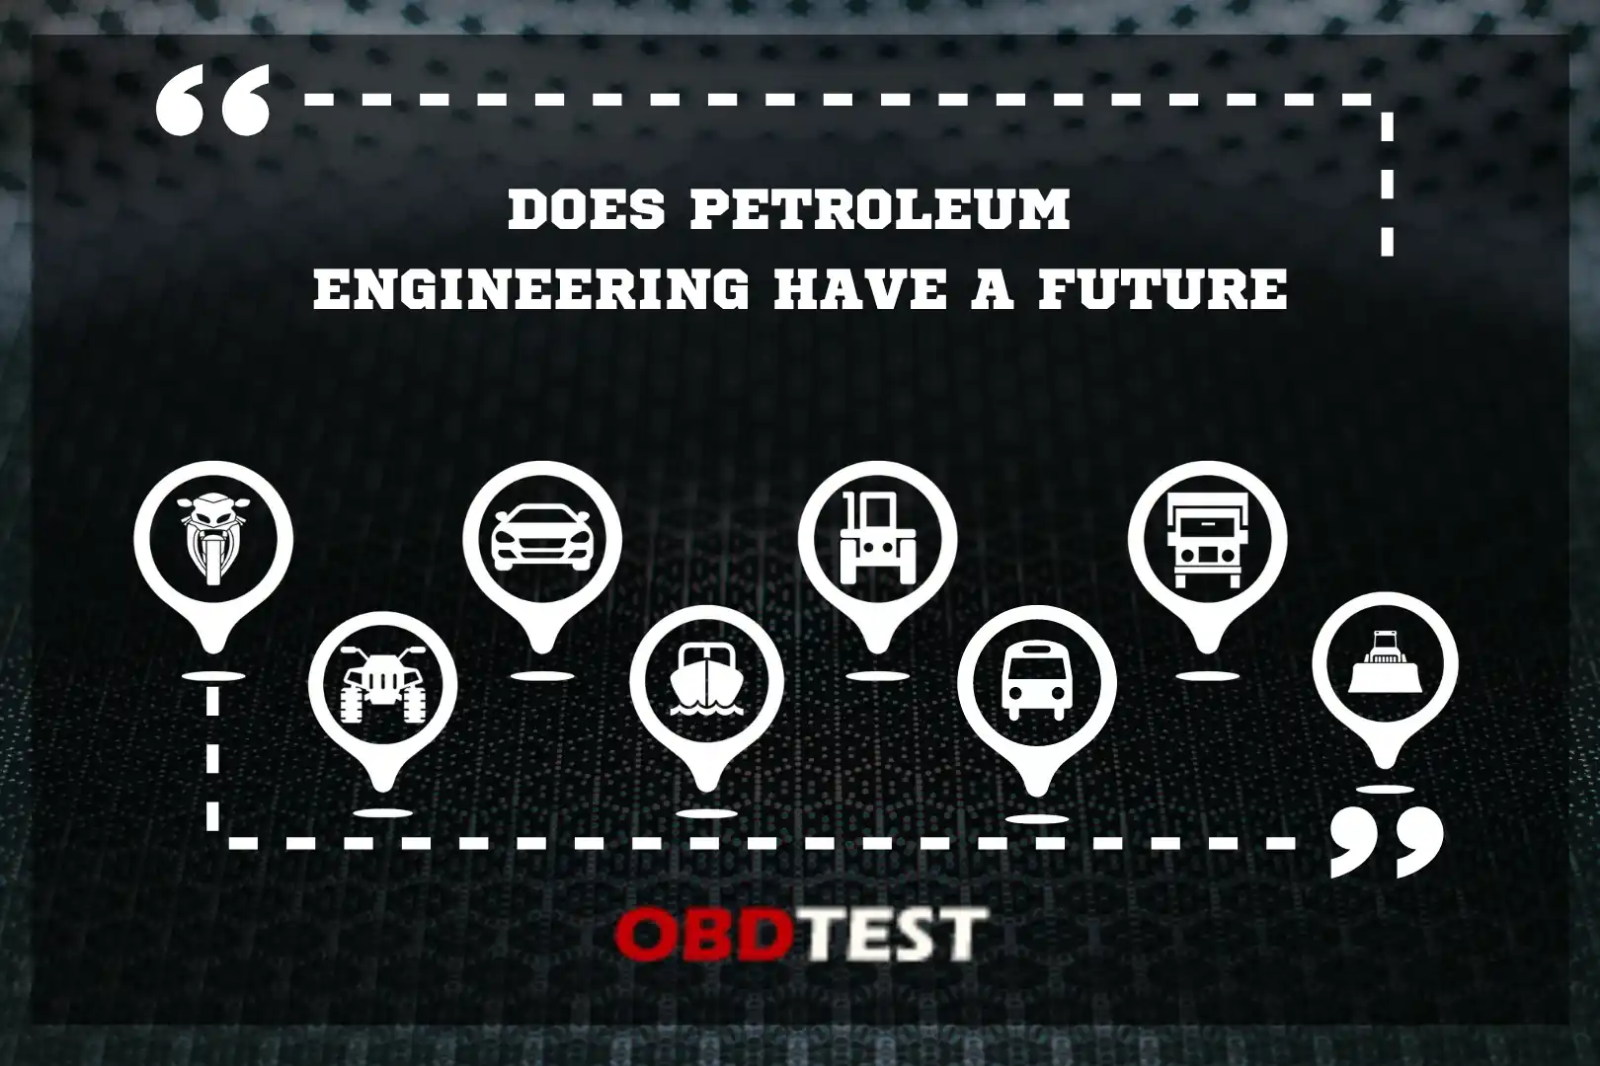 Does petroleum engineering have a future?